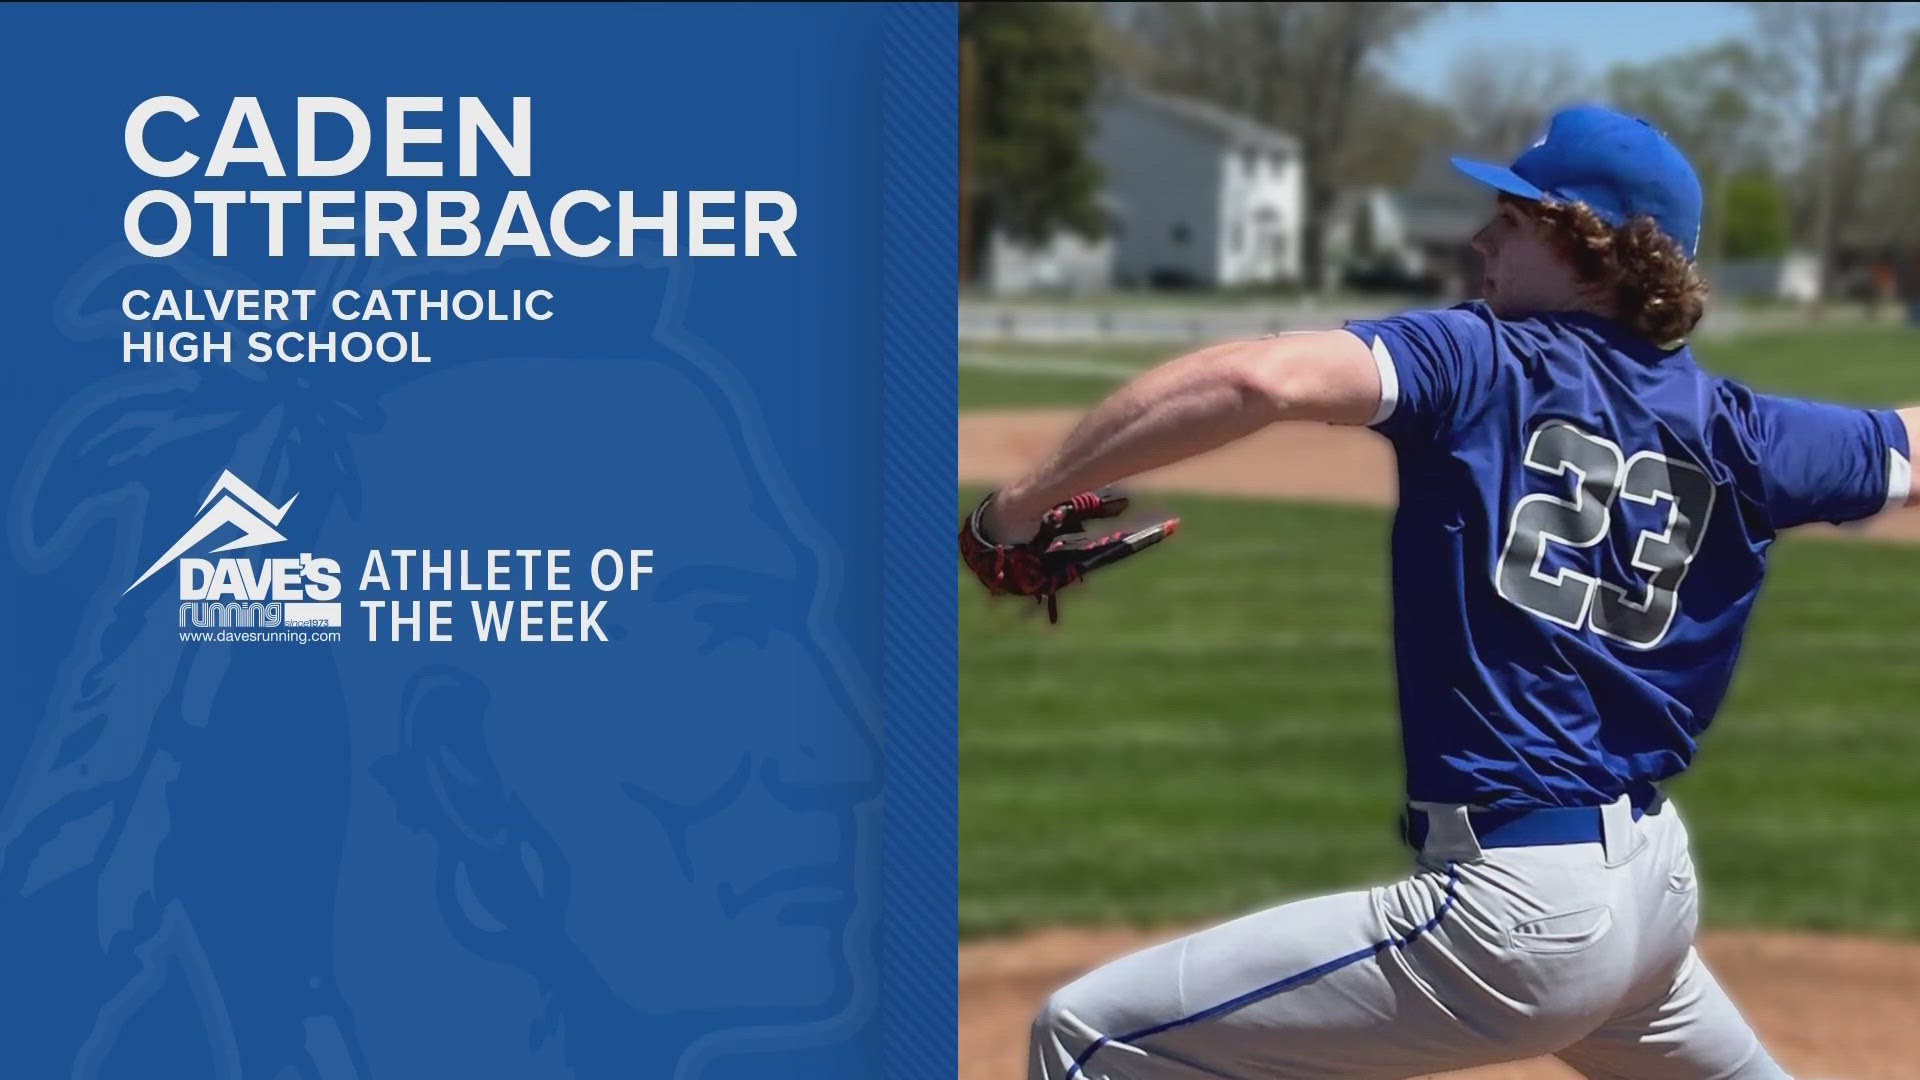 The Tiffin Calvert Senecas are one of the top baseball teams in the state of Ohio. A big reason why is pitching, especially from Caden Otterbacher.